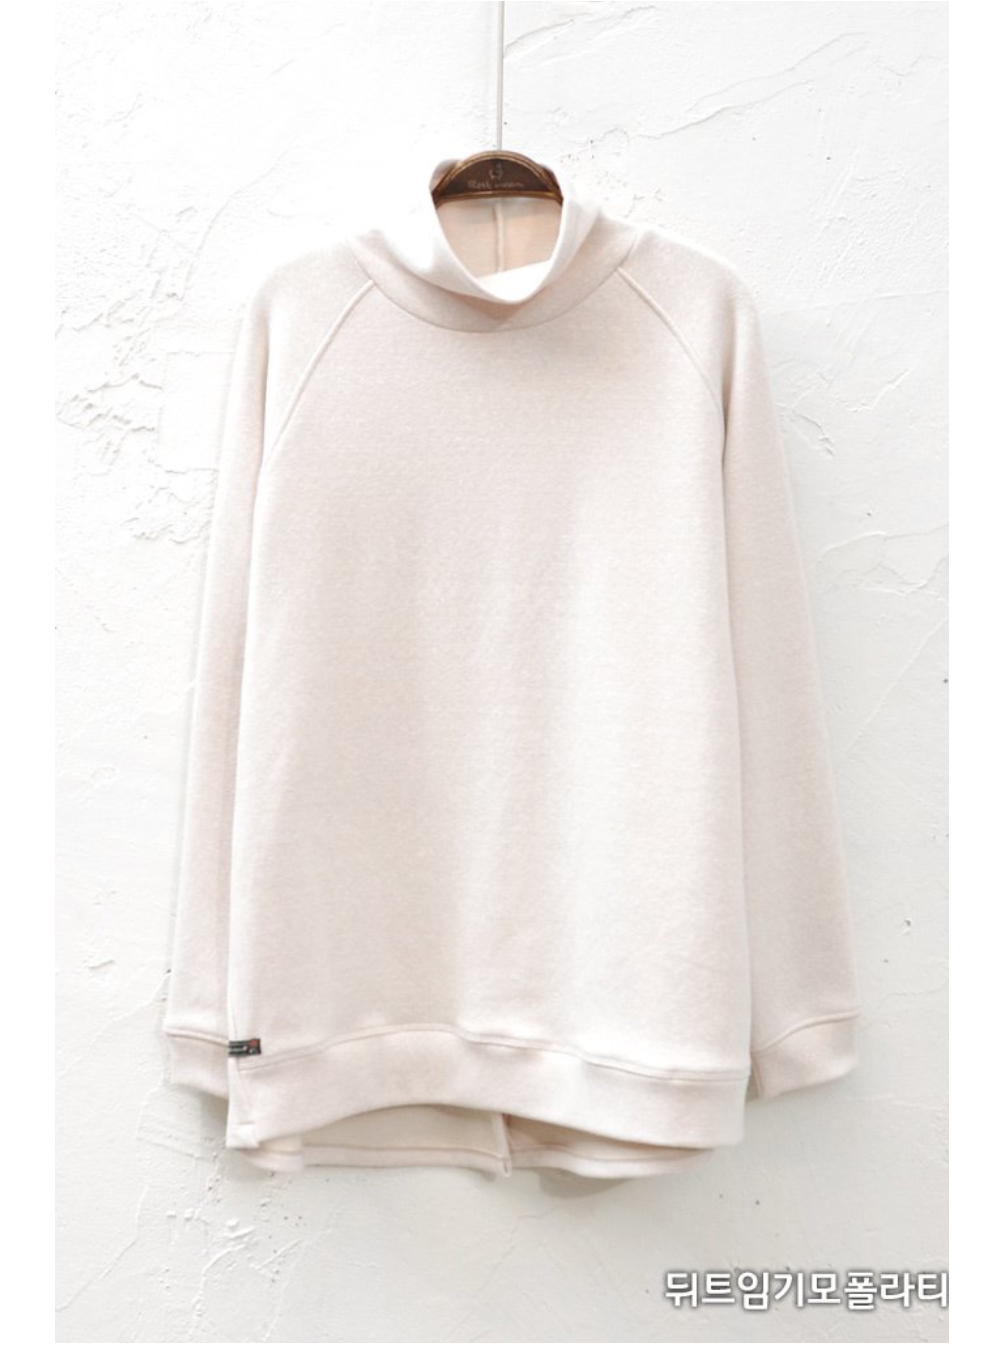 long sleeved tee white color image-S1L45